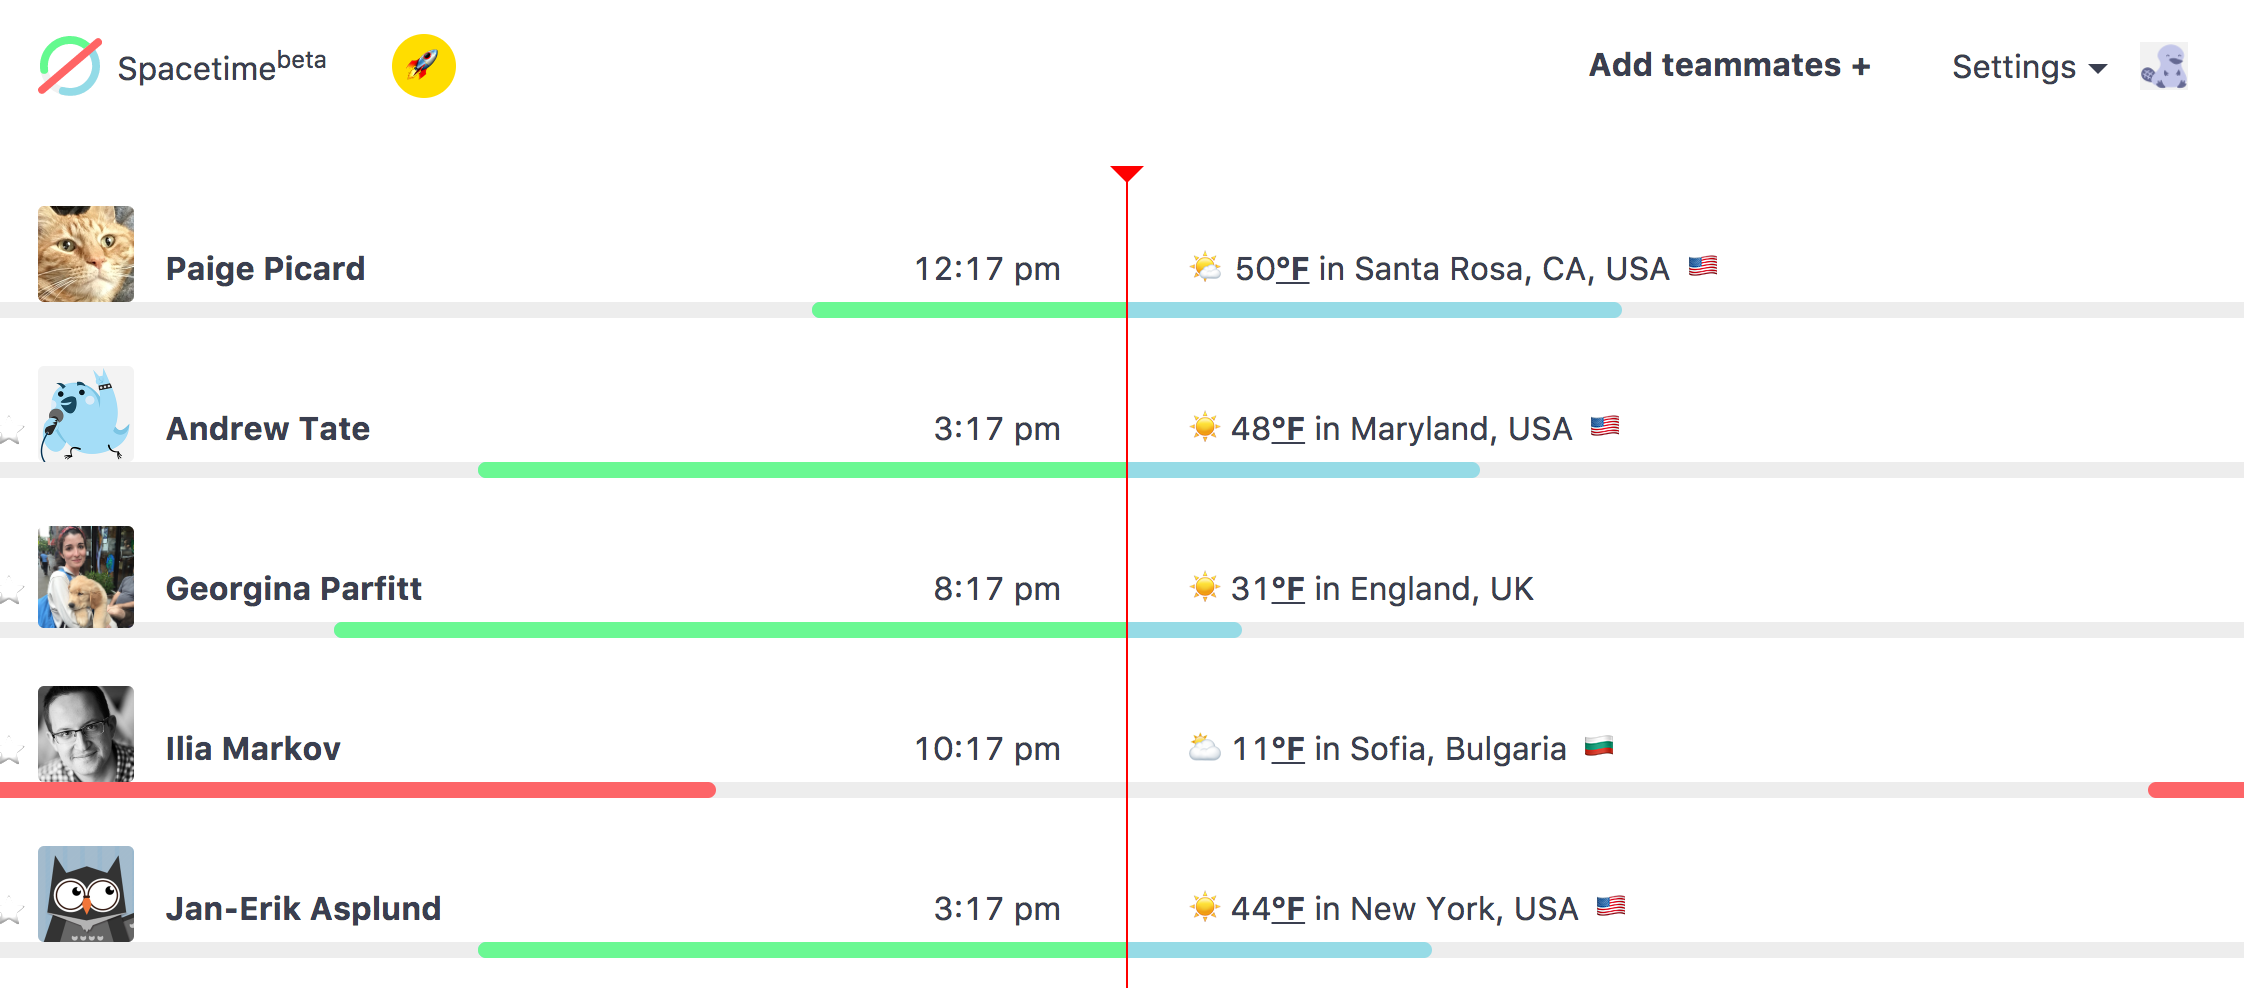 20 Vetted Tools and Tips for Managing Time Zone Differences - I